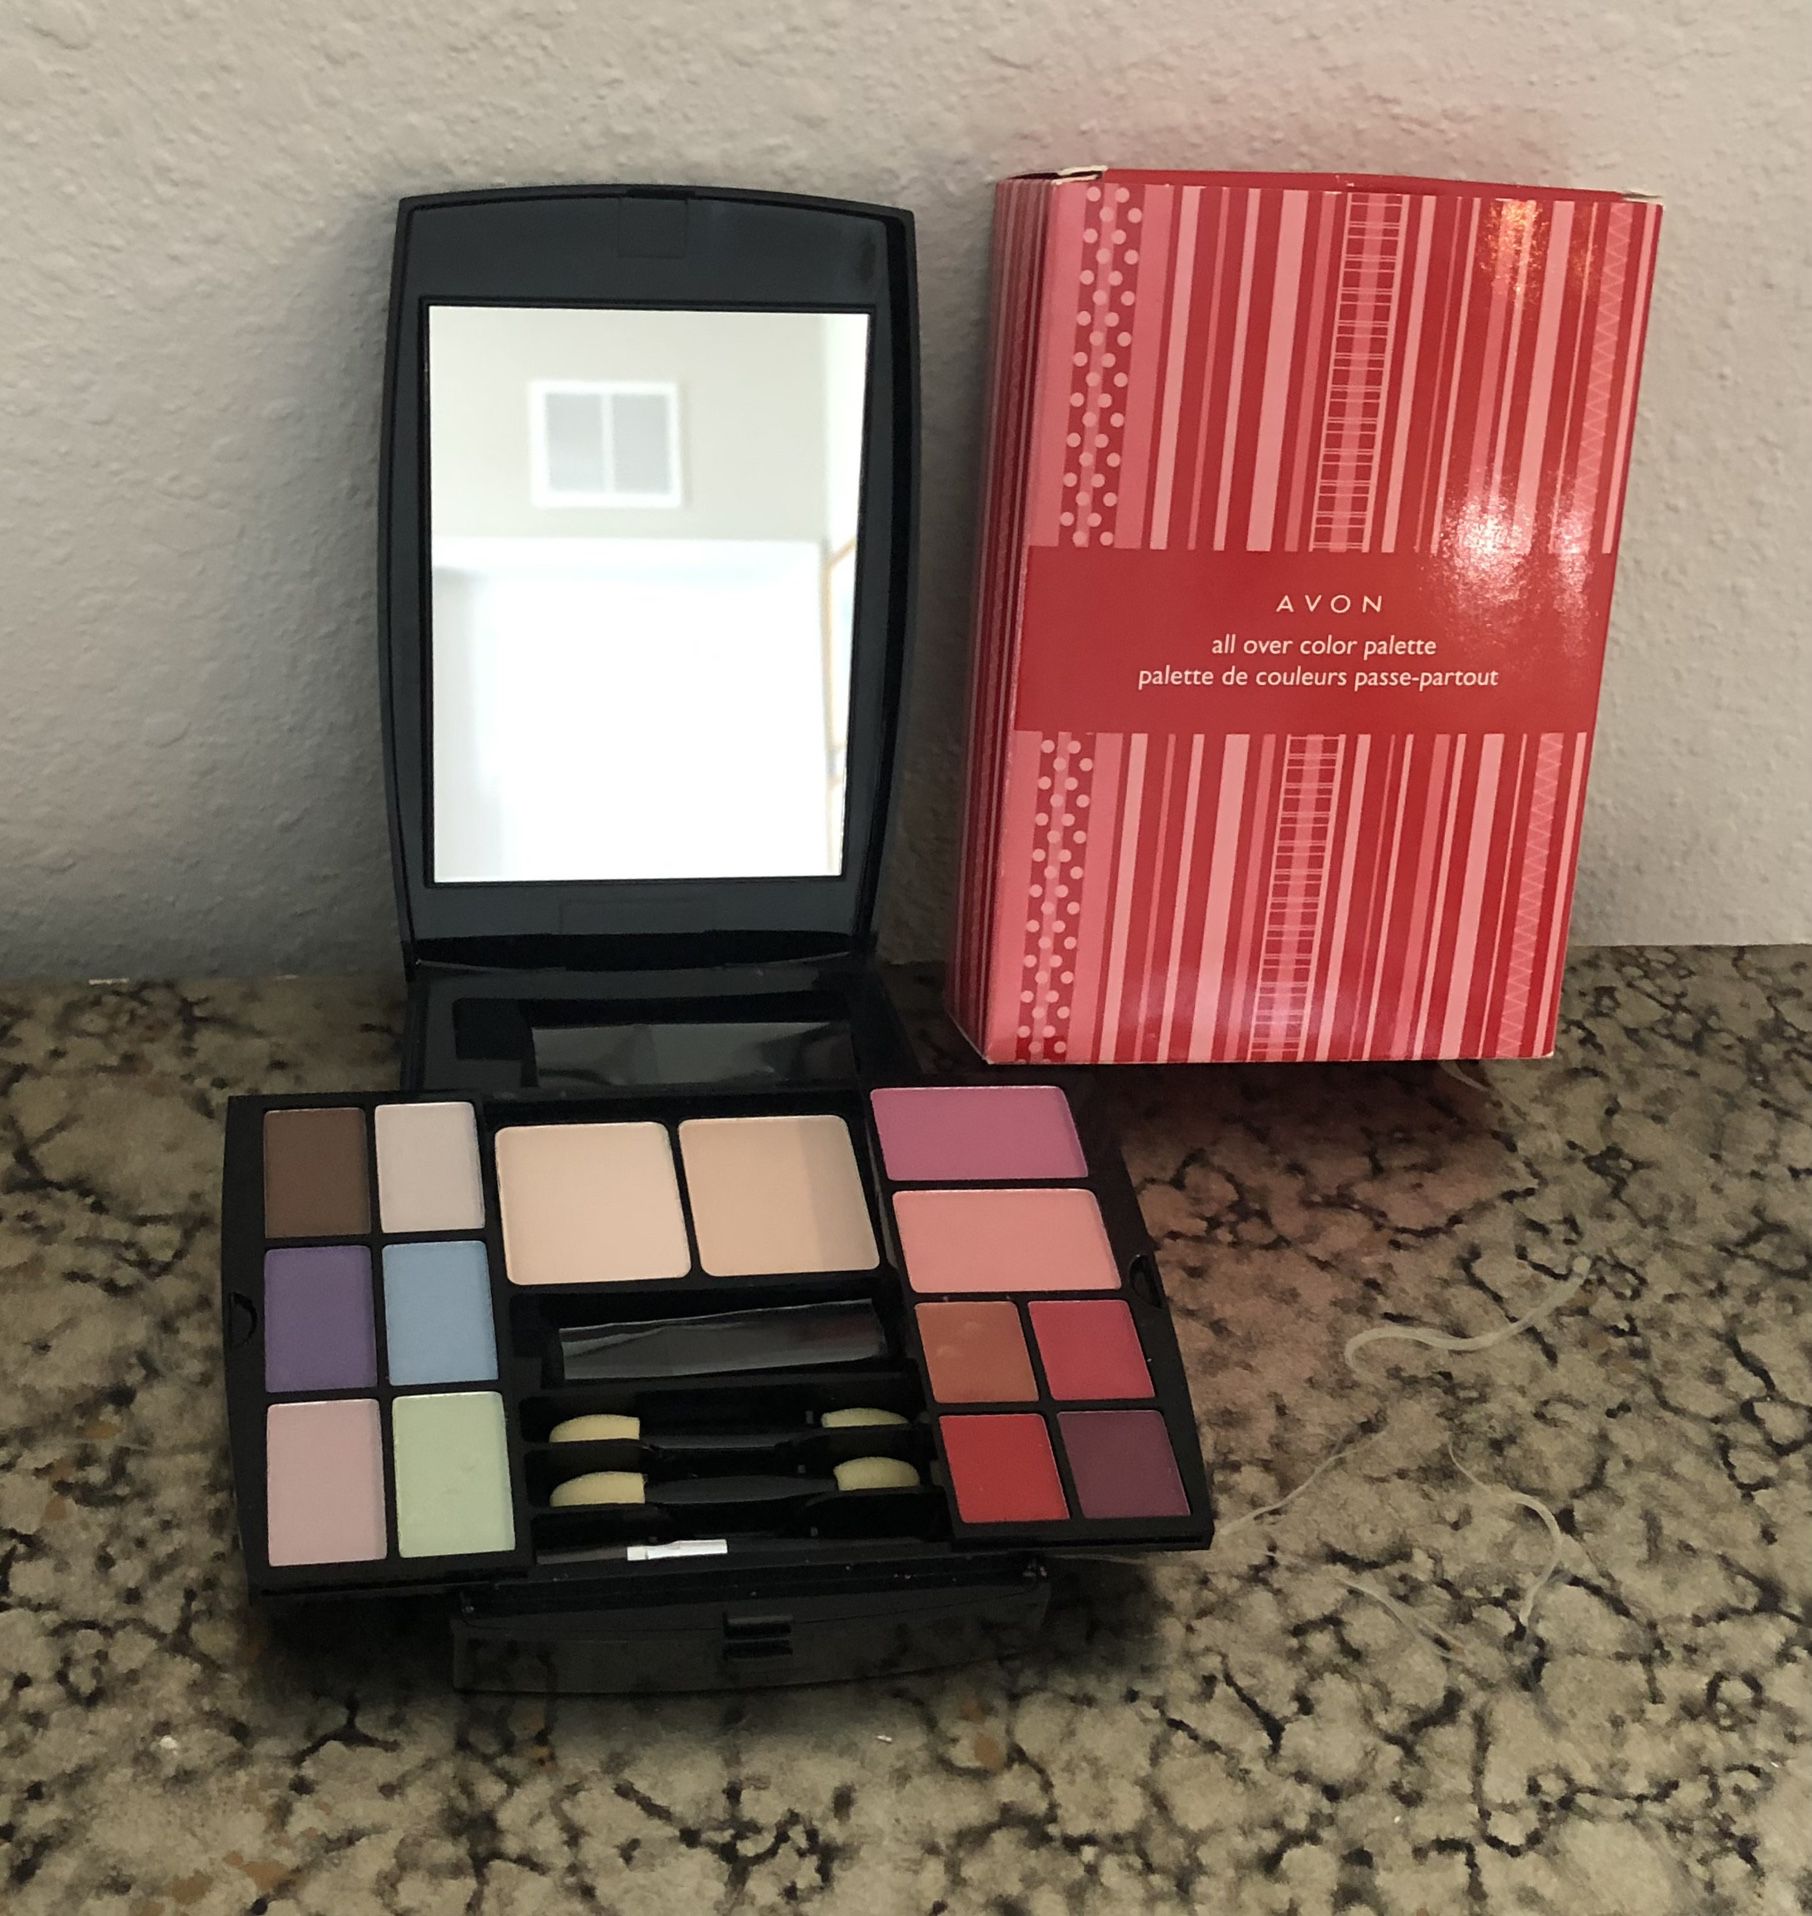 Avon Makeup All Over Color Palette 4 Lip/ 6 Eyeshadow/ 2 Blush/ 2 Face Powder 2004. - New In Box